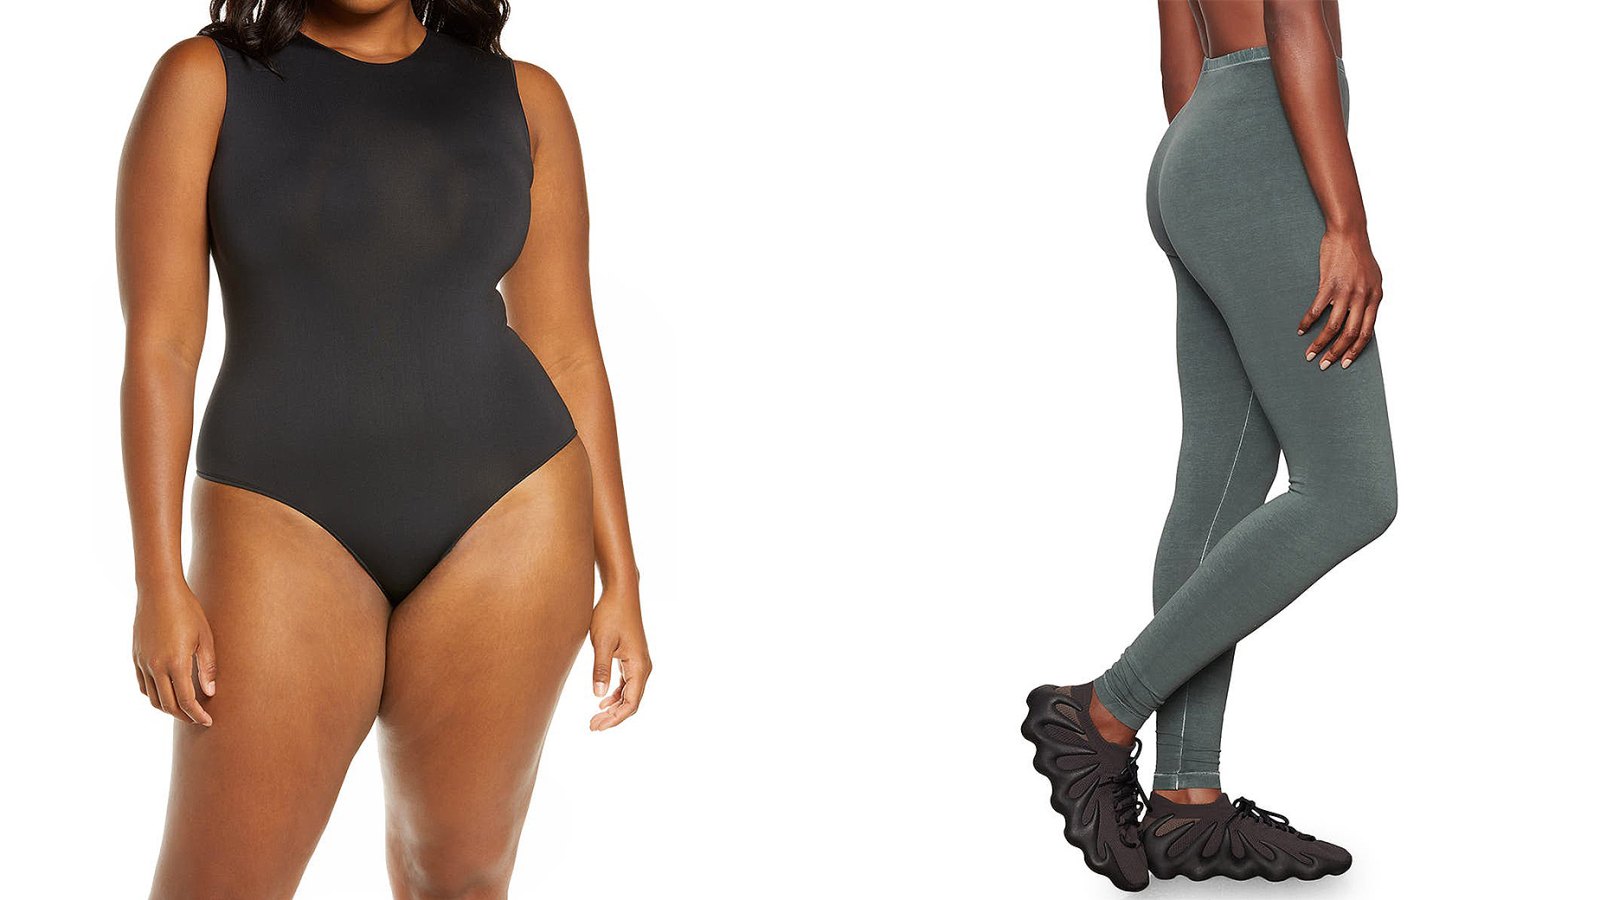 Skims Body-Contouring Pieces and Comfy Musts Starting at Just $8